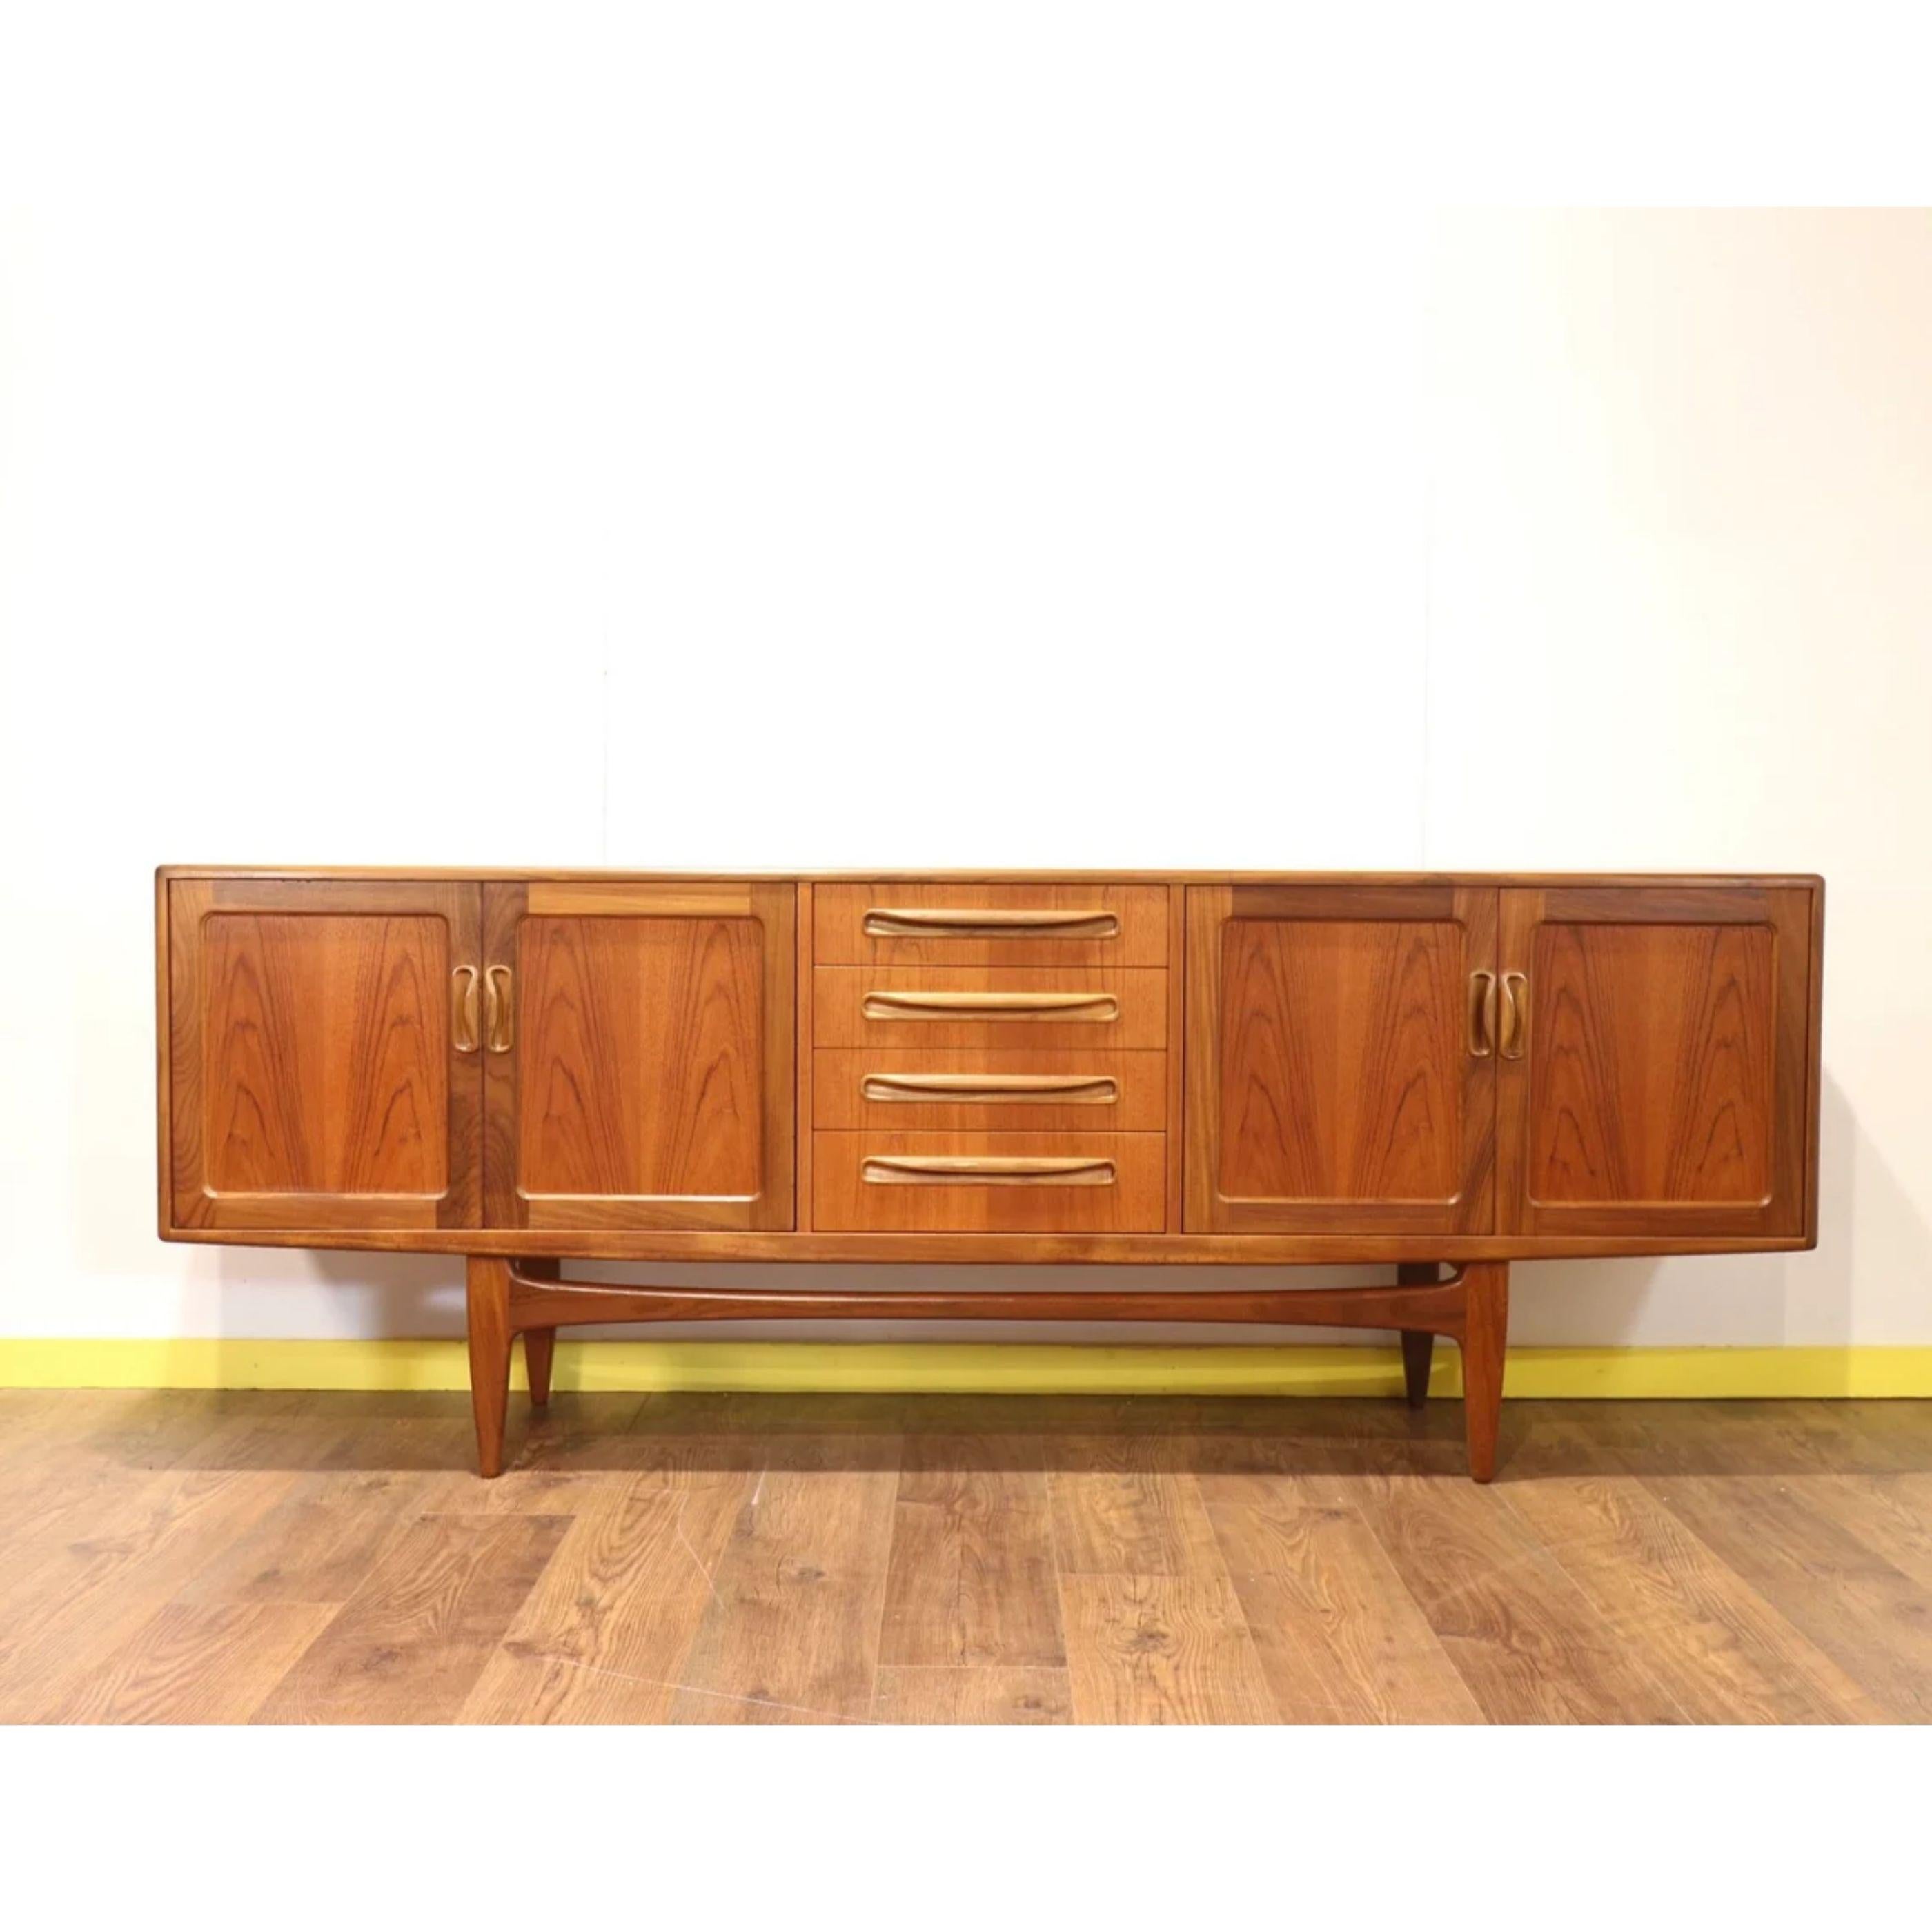 This fabulous G Plan credenza is part of the fresco range and designed by V B Wilkins around 1965. This is a classic British credenza with Danish style making it one of the most popular credenza made by G plan, a real statement piece. The Credenza